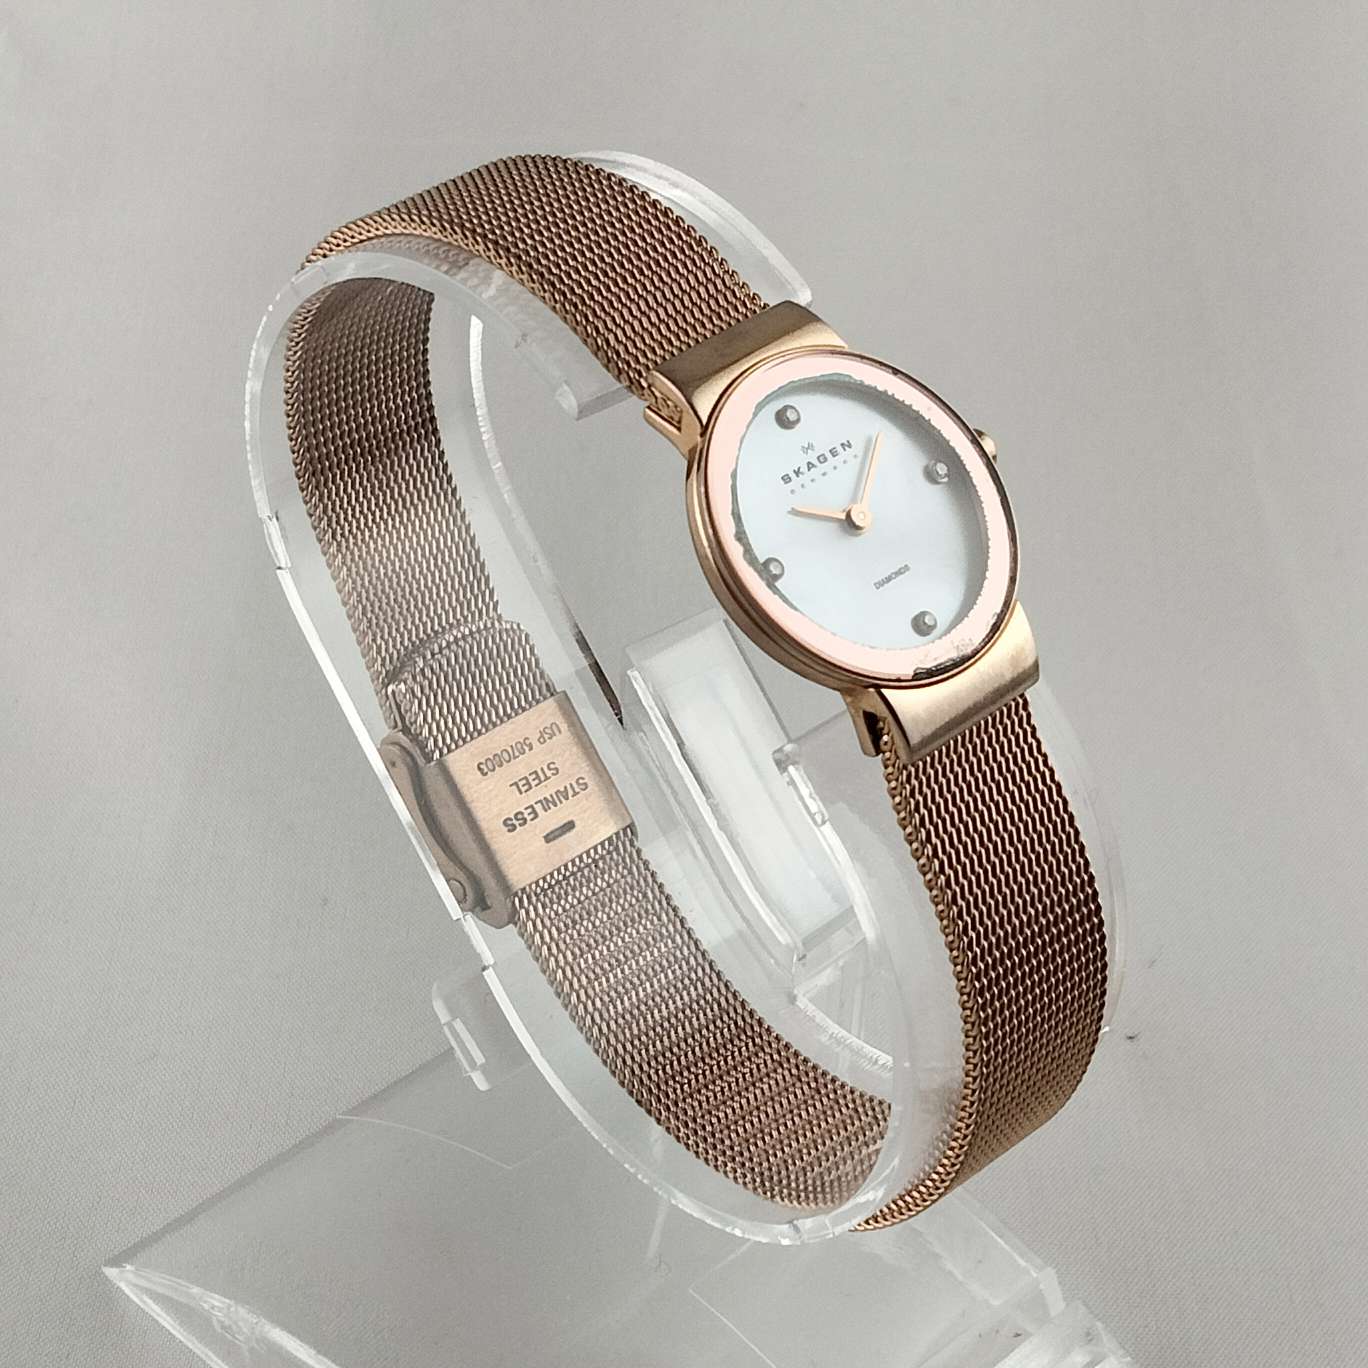 Skagen Petite Women's Watch, Mother of Pearl Dial, Rose Gold Tone Details, Mesh Strap